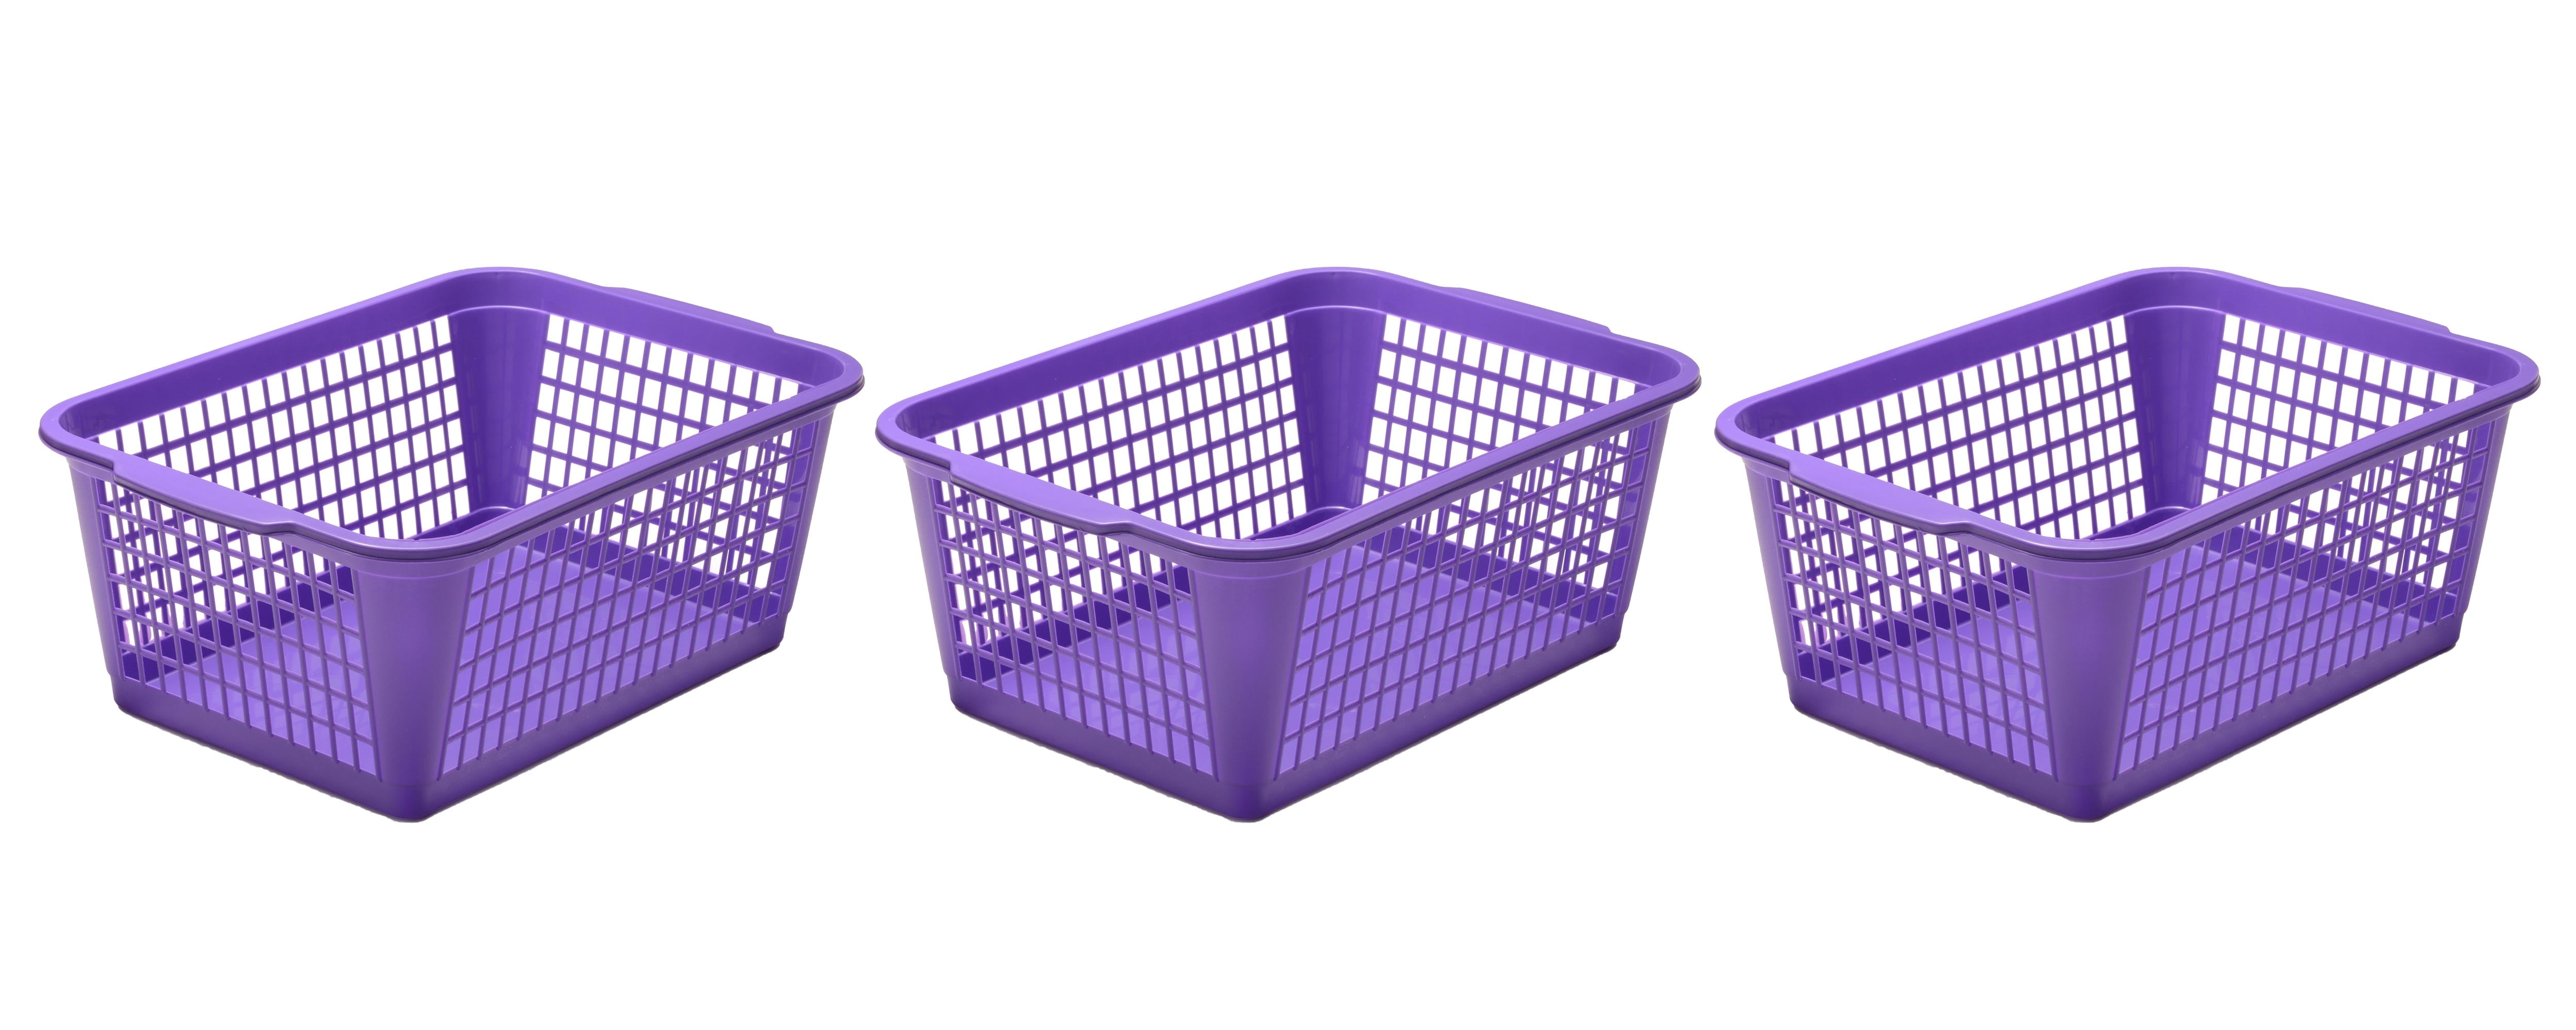 YBM Home Large Plastic Storage Basket with Handle for Home and Office, Blue  15 L x 10 W x 6 H